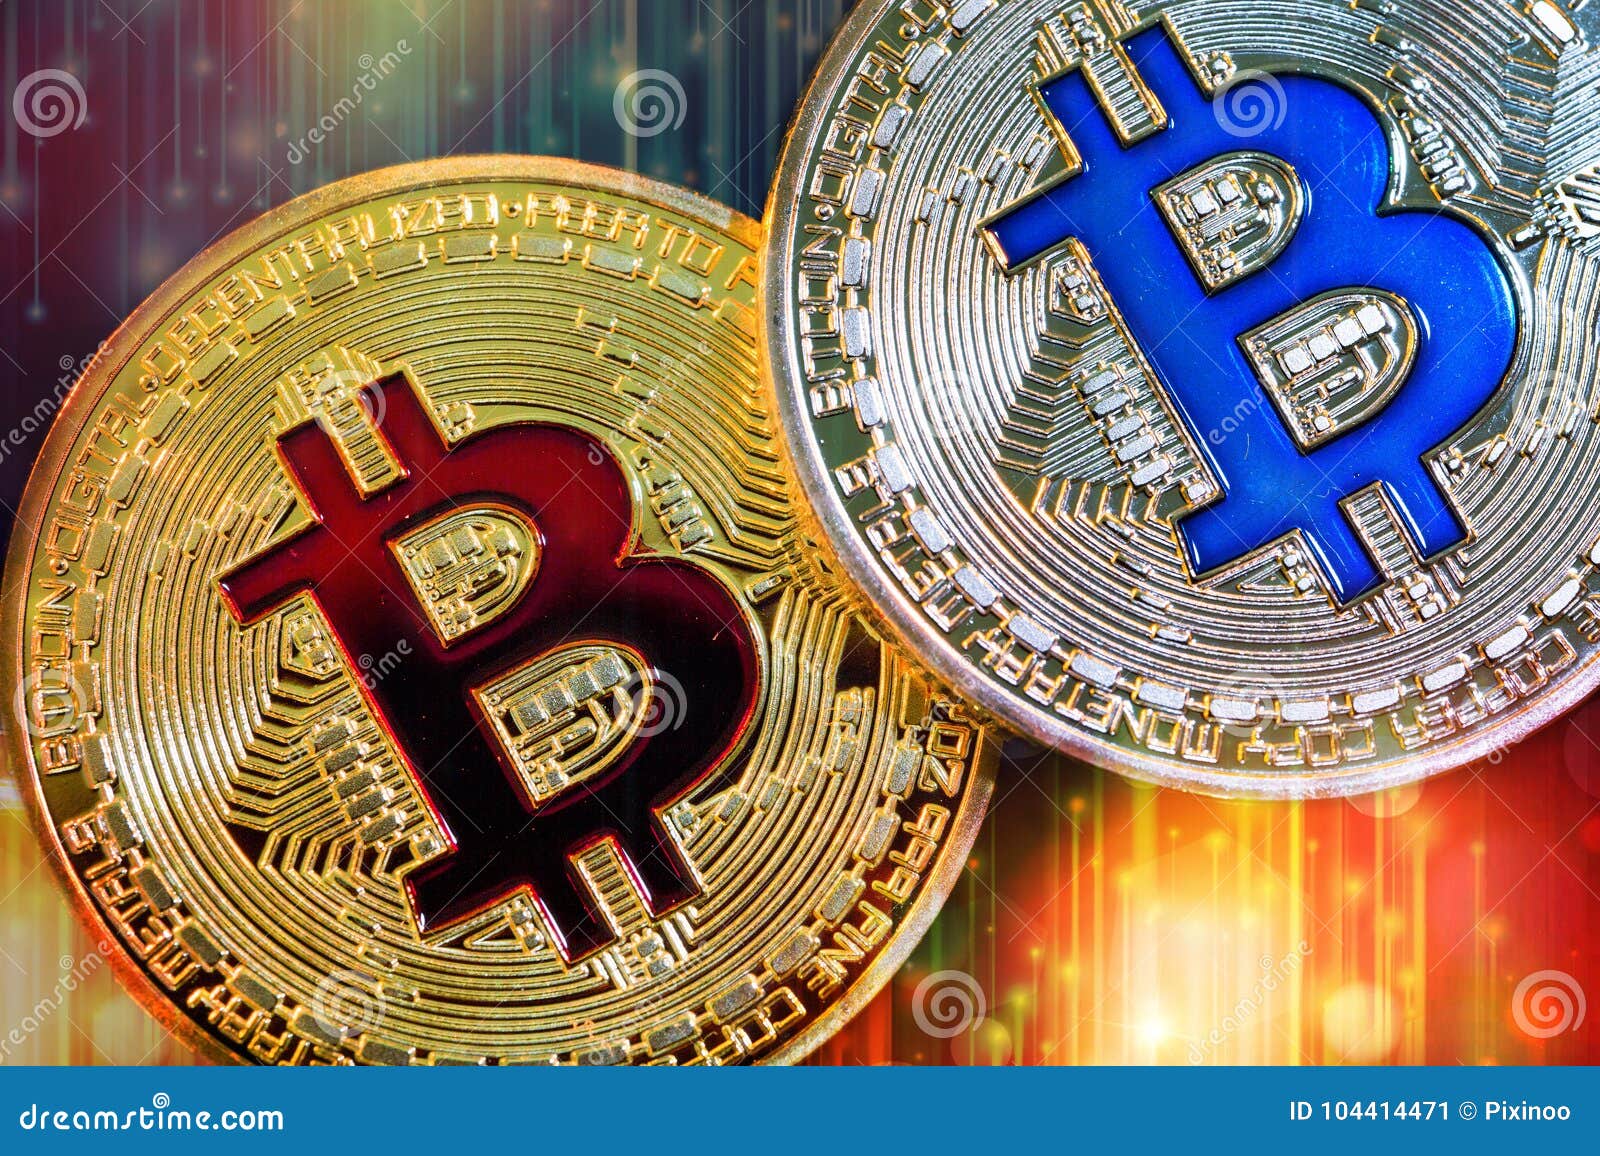 Physical Version Of Bitcoin New Virtual Money With ...